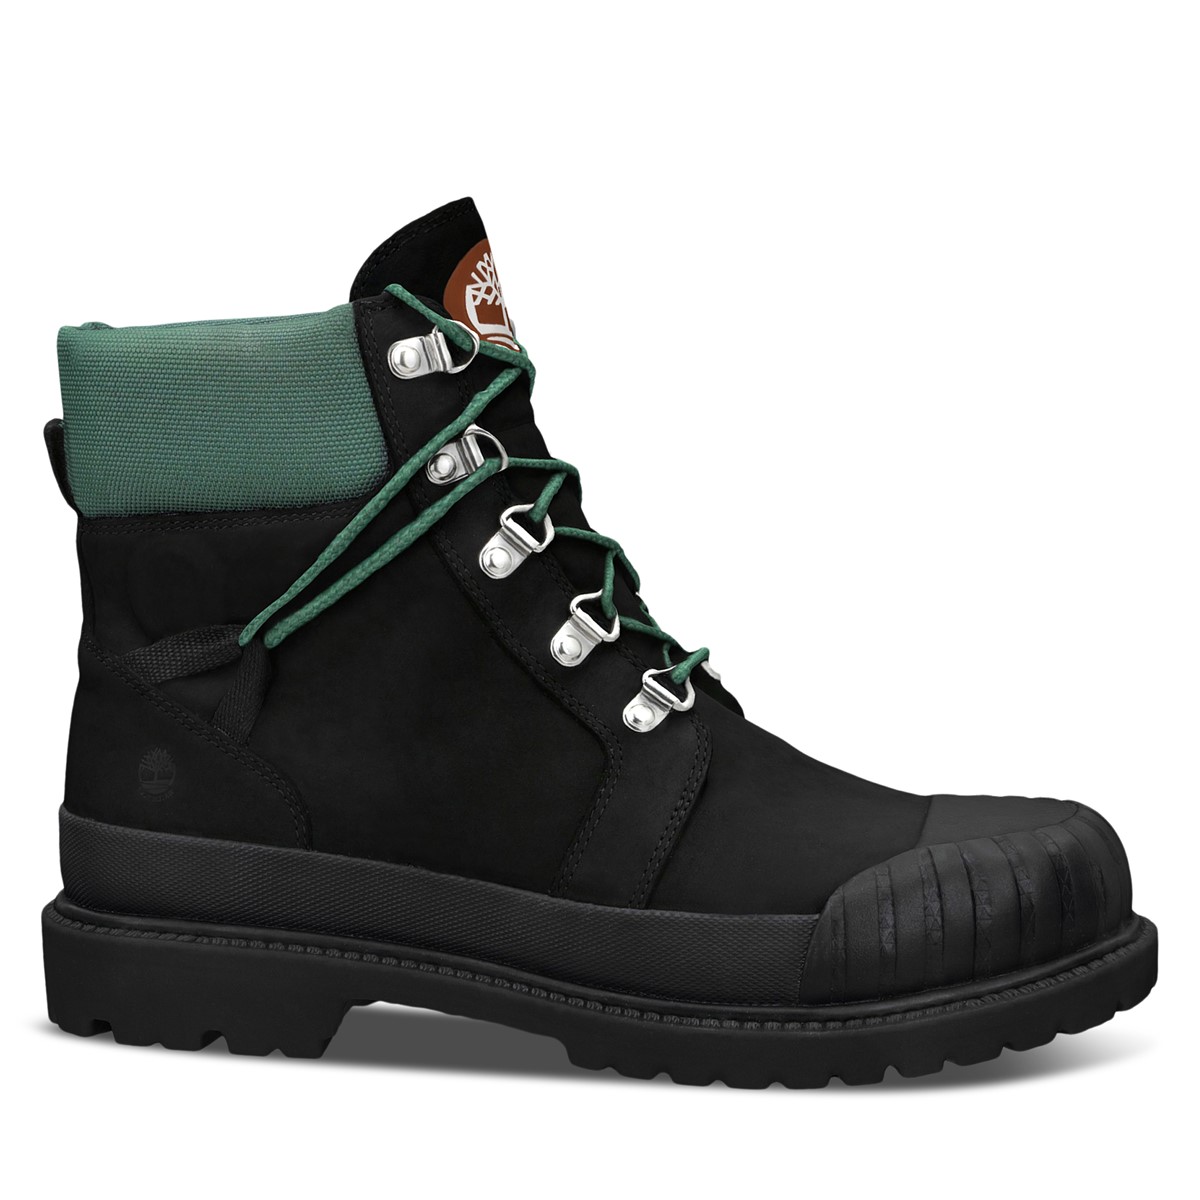 Women's Heritage 6-Inch Waterproof Lace-Up Boots in Black/Green